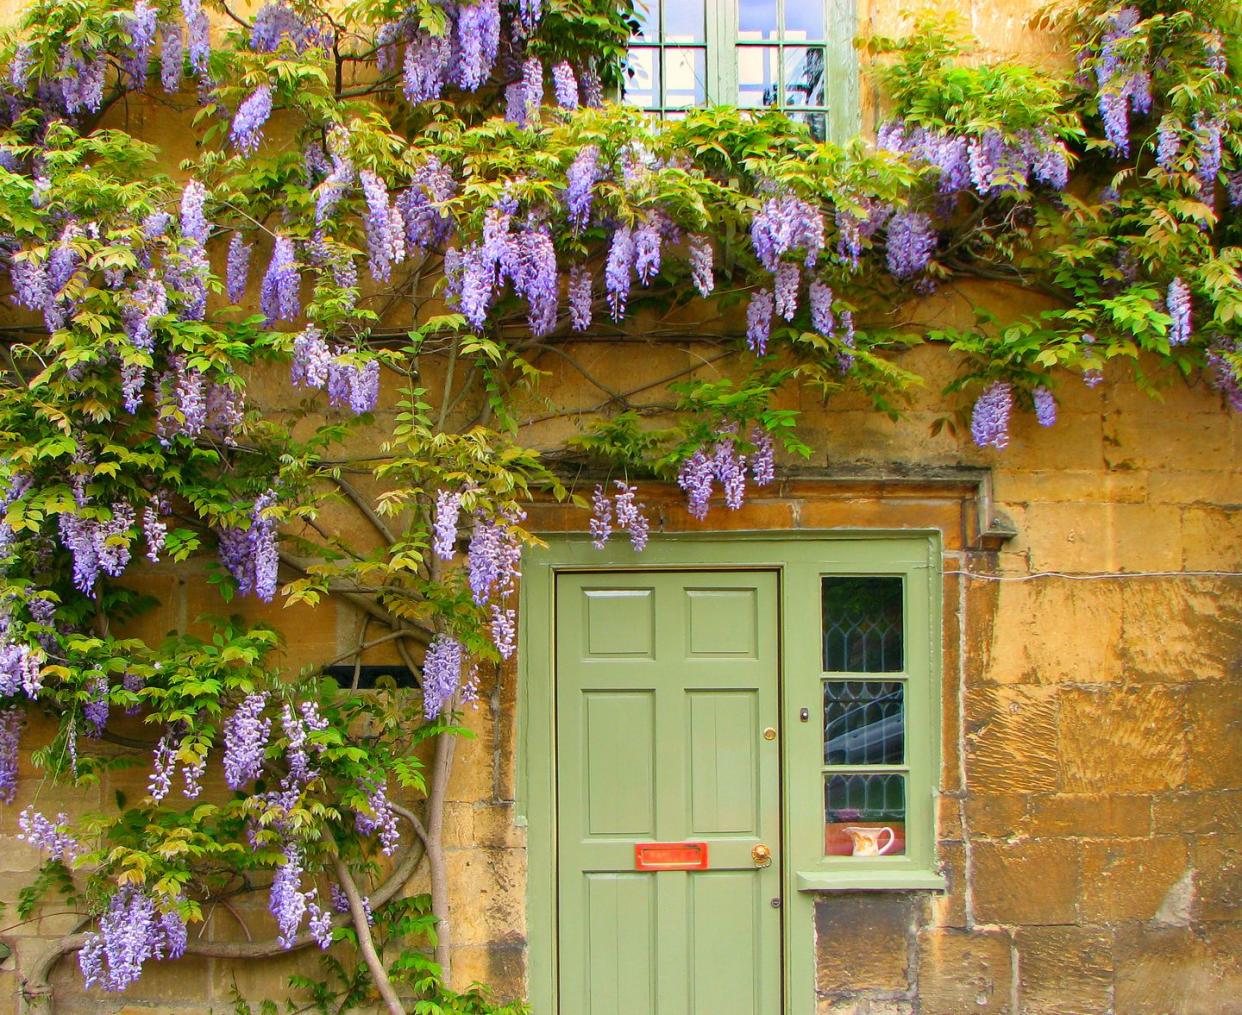 wisteria in full bloom surrounds front of cotswold stone cottage in moreton in marsh, england